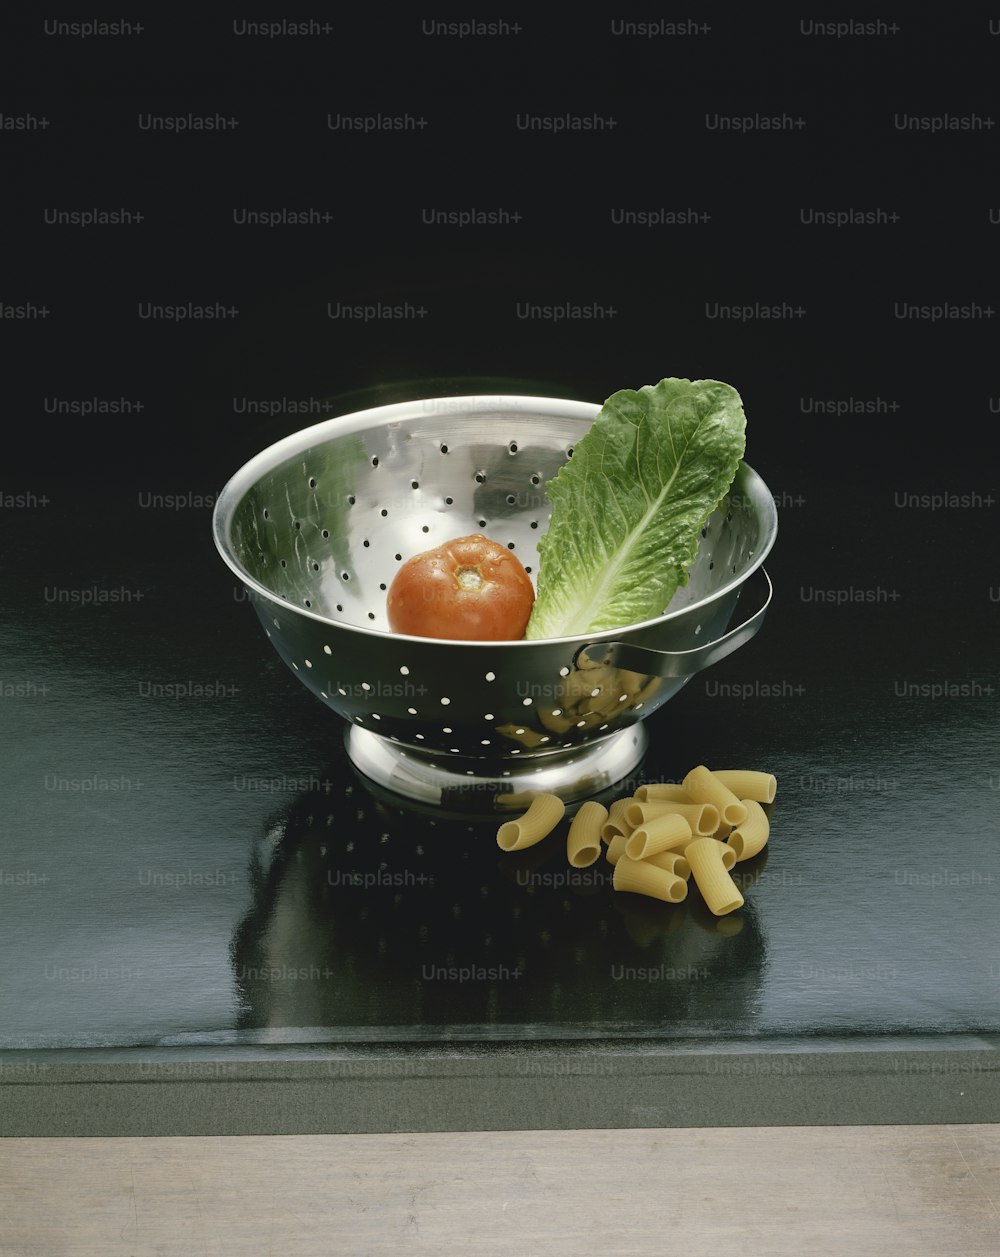 a colander with pasta and a tomato in it